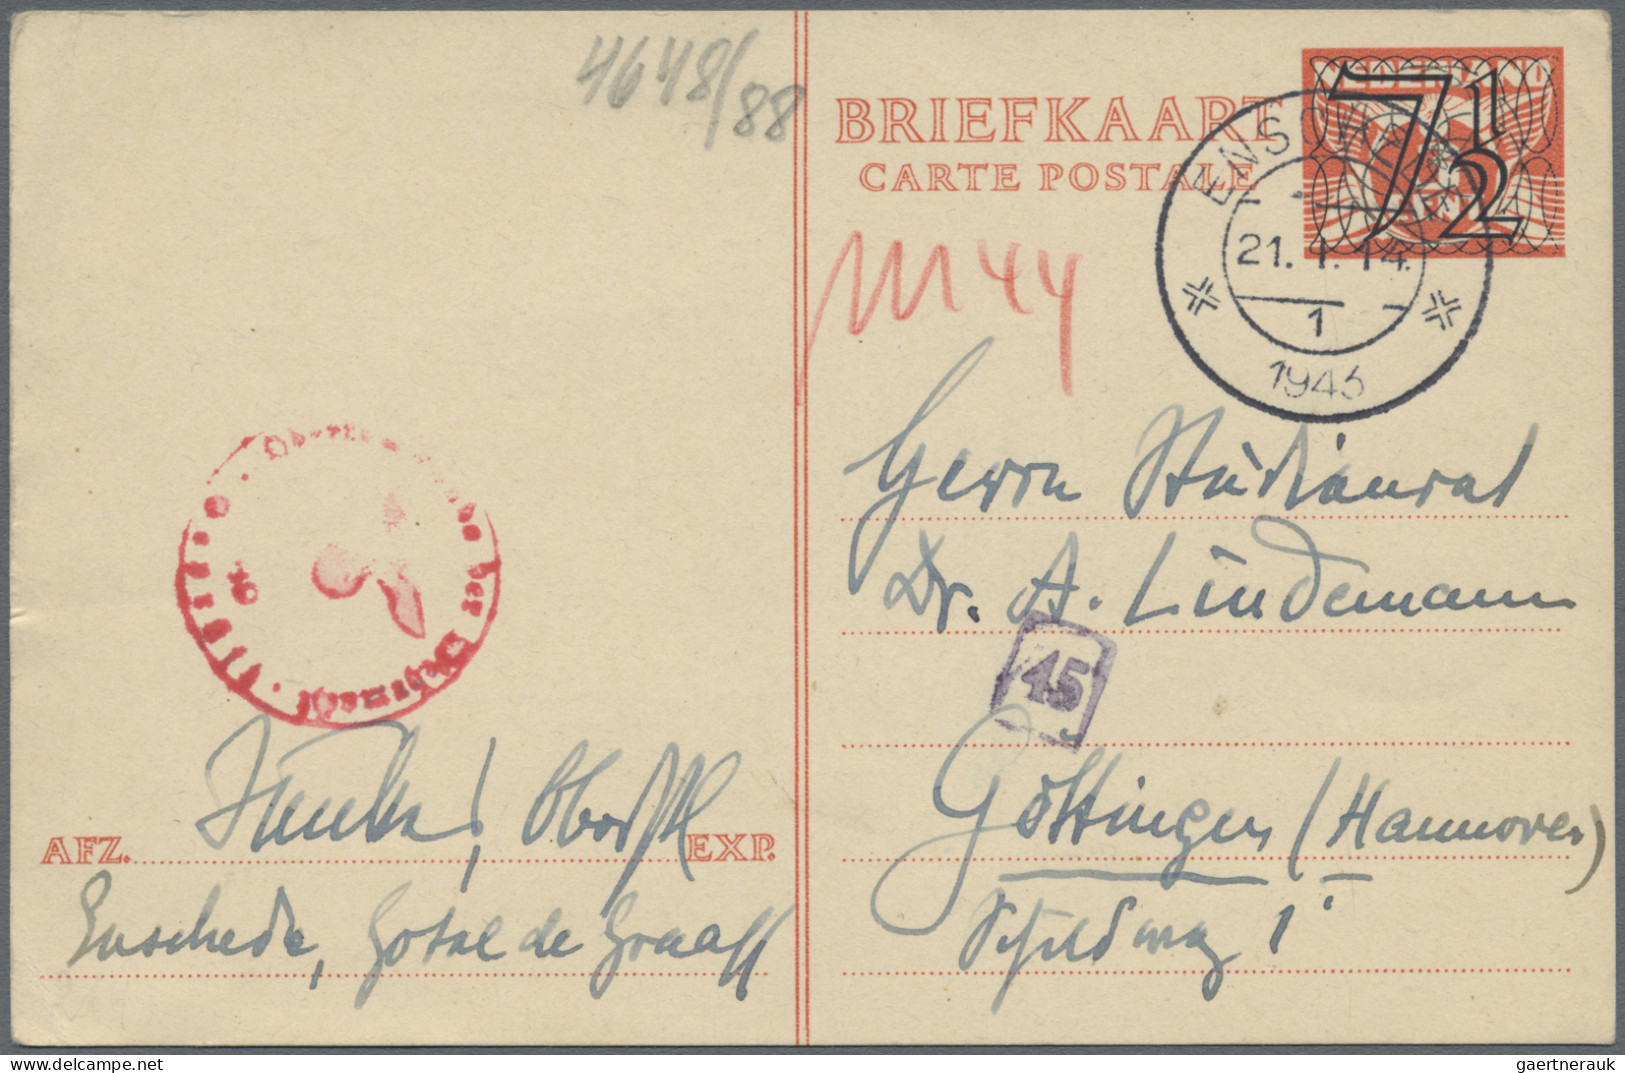 Netherlands - postal stationery: 1870/1950 (ca.), assortment of apprx. 144 used/